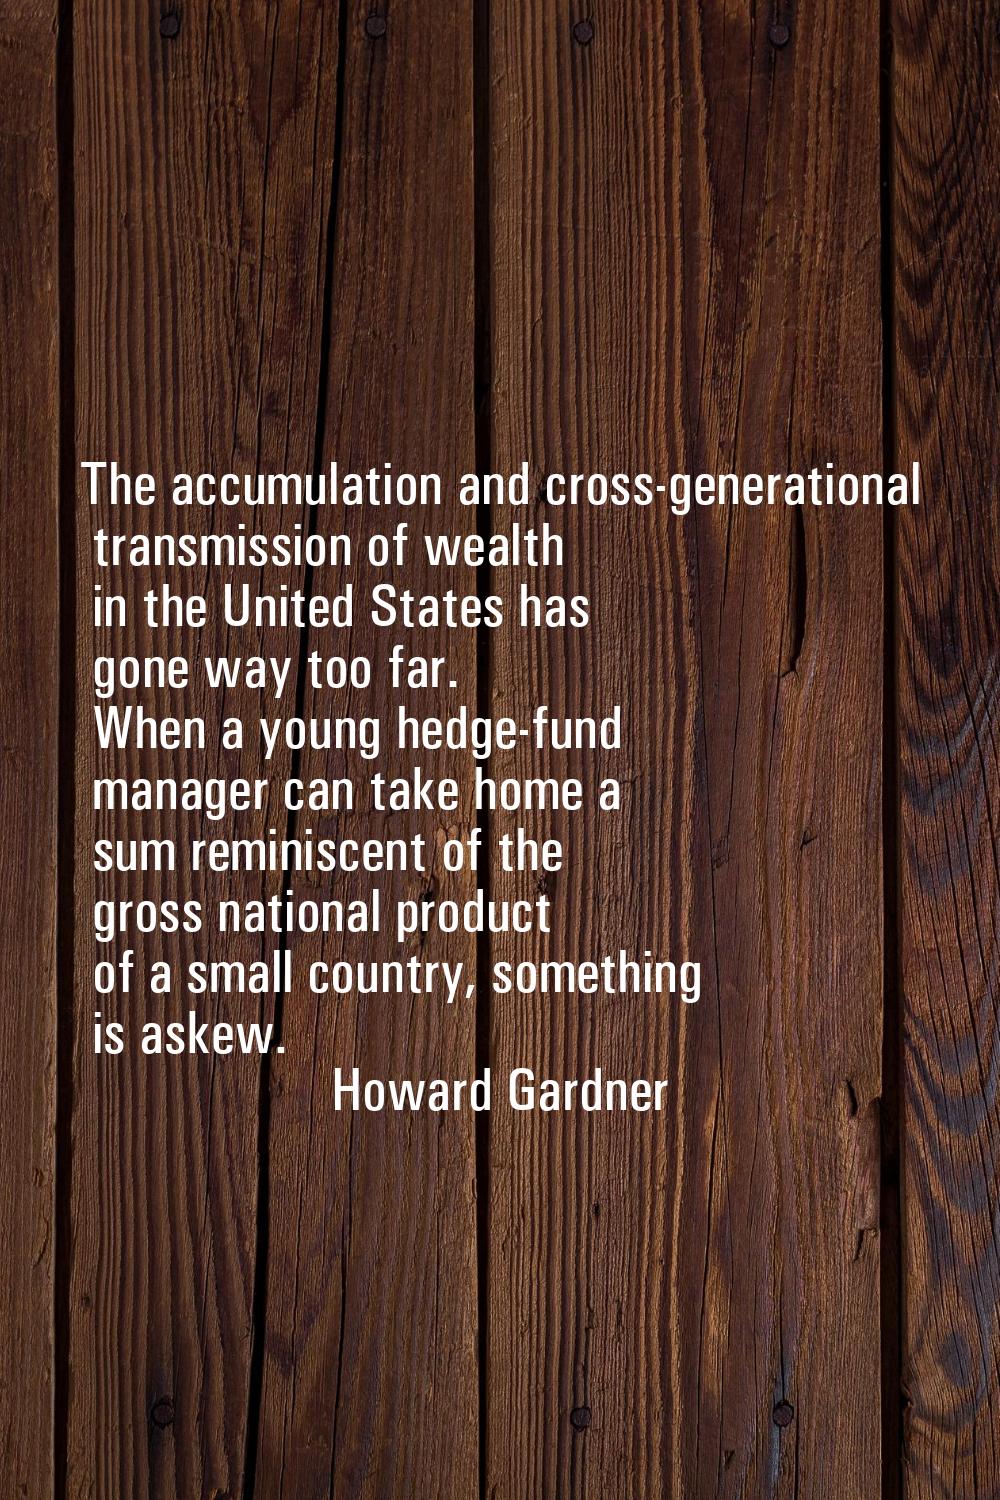 The accumulation and cross-generational transmission of wealth in the United States has gone way to